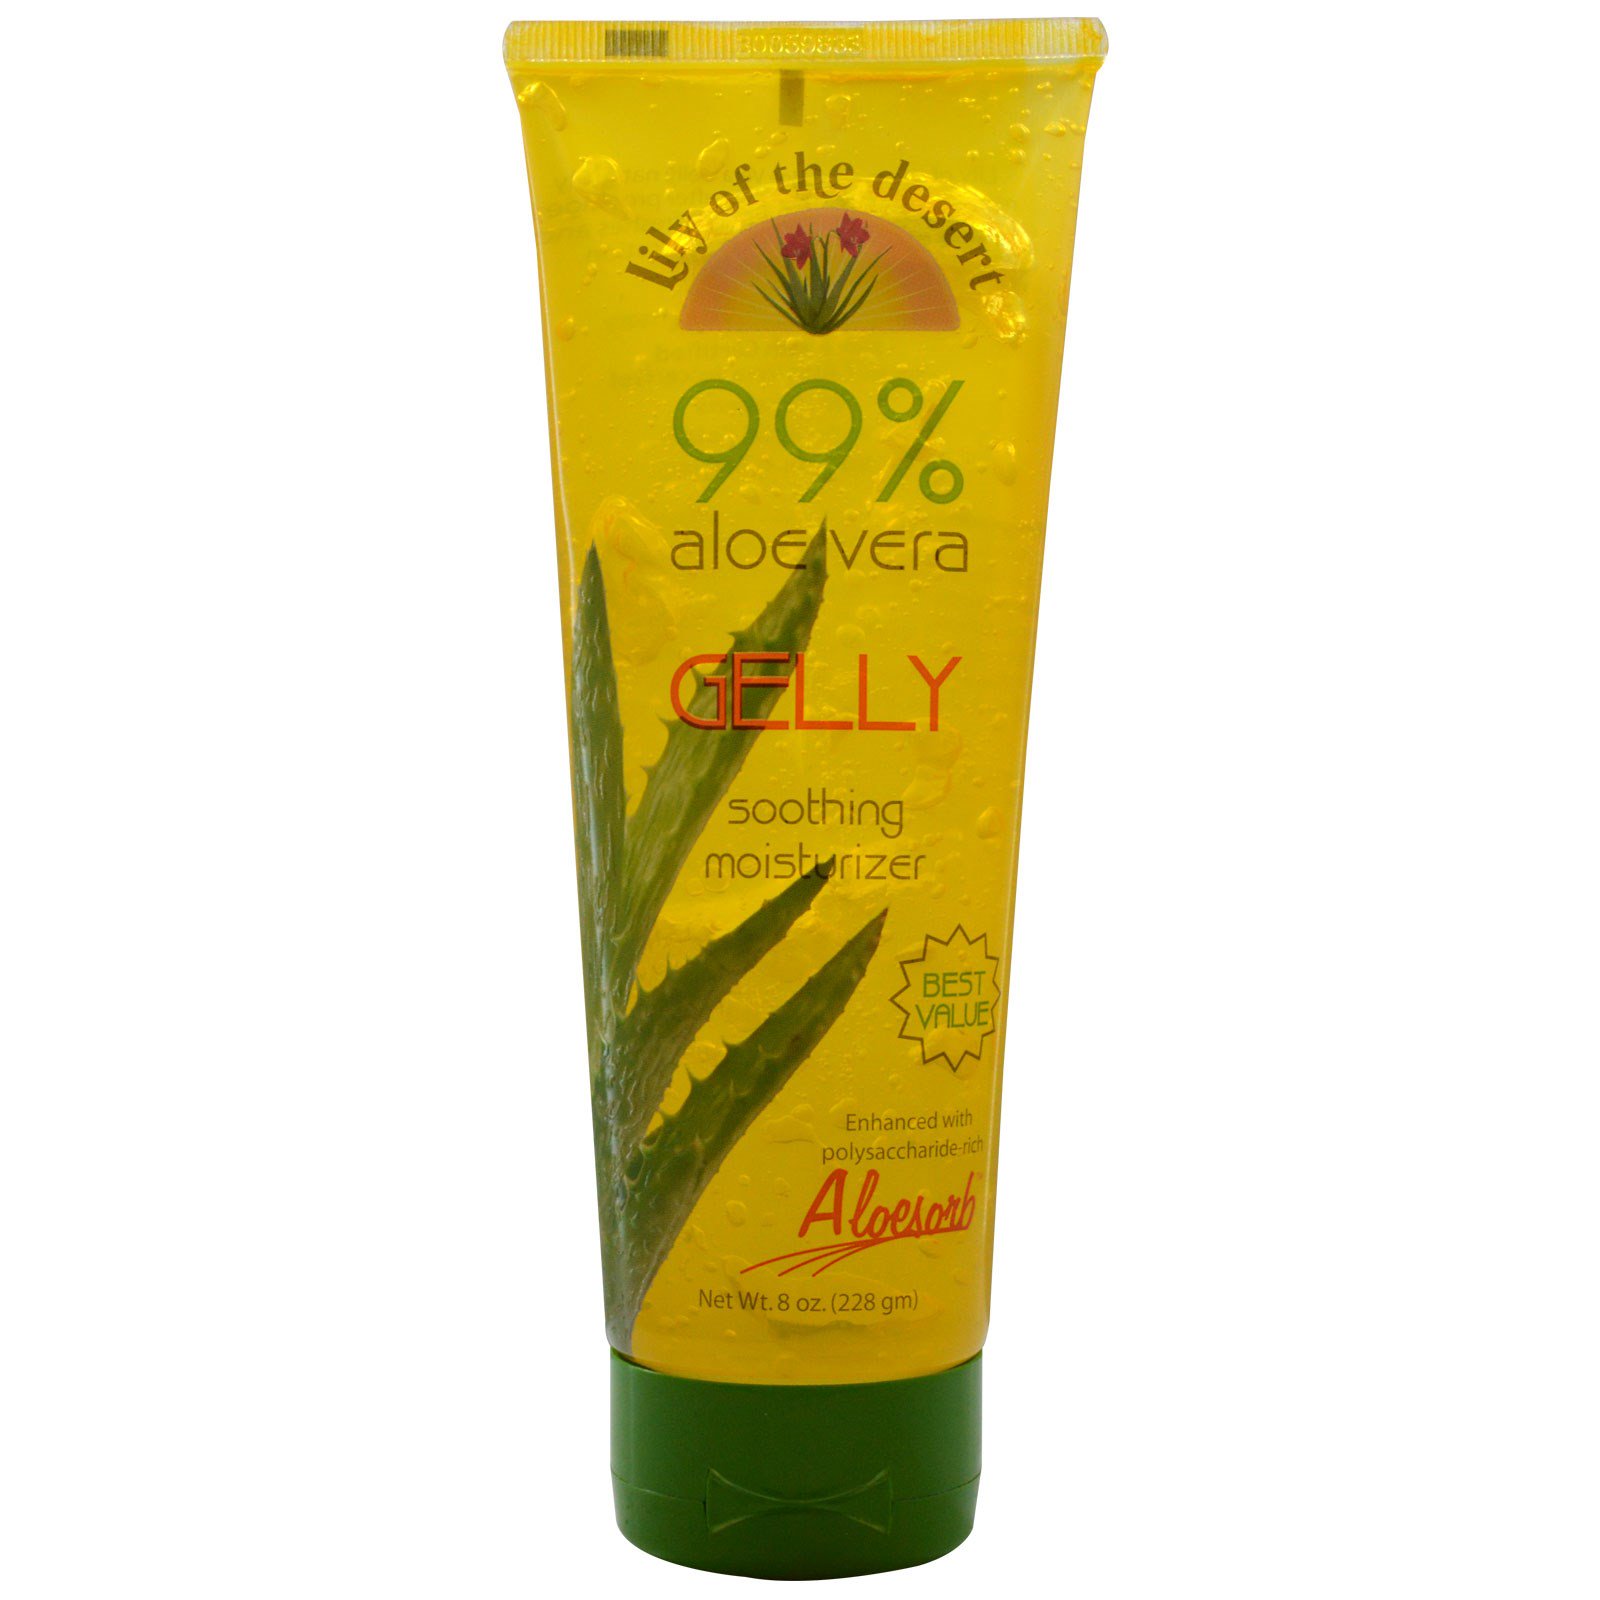 LILY OF THE DESERT - 99% ALOE VERA GELLY - SOOTHING MOISTURIZER - 8oz